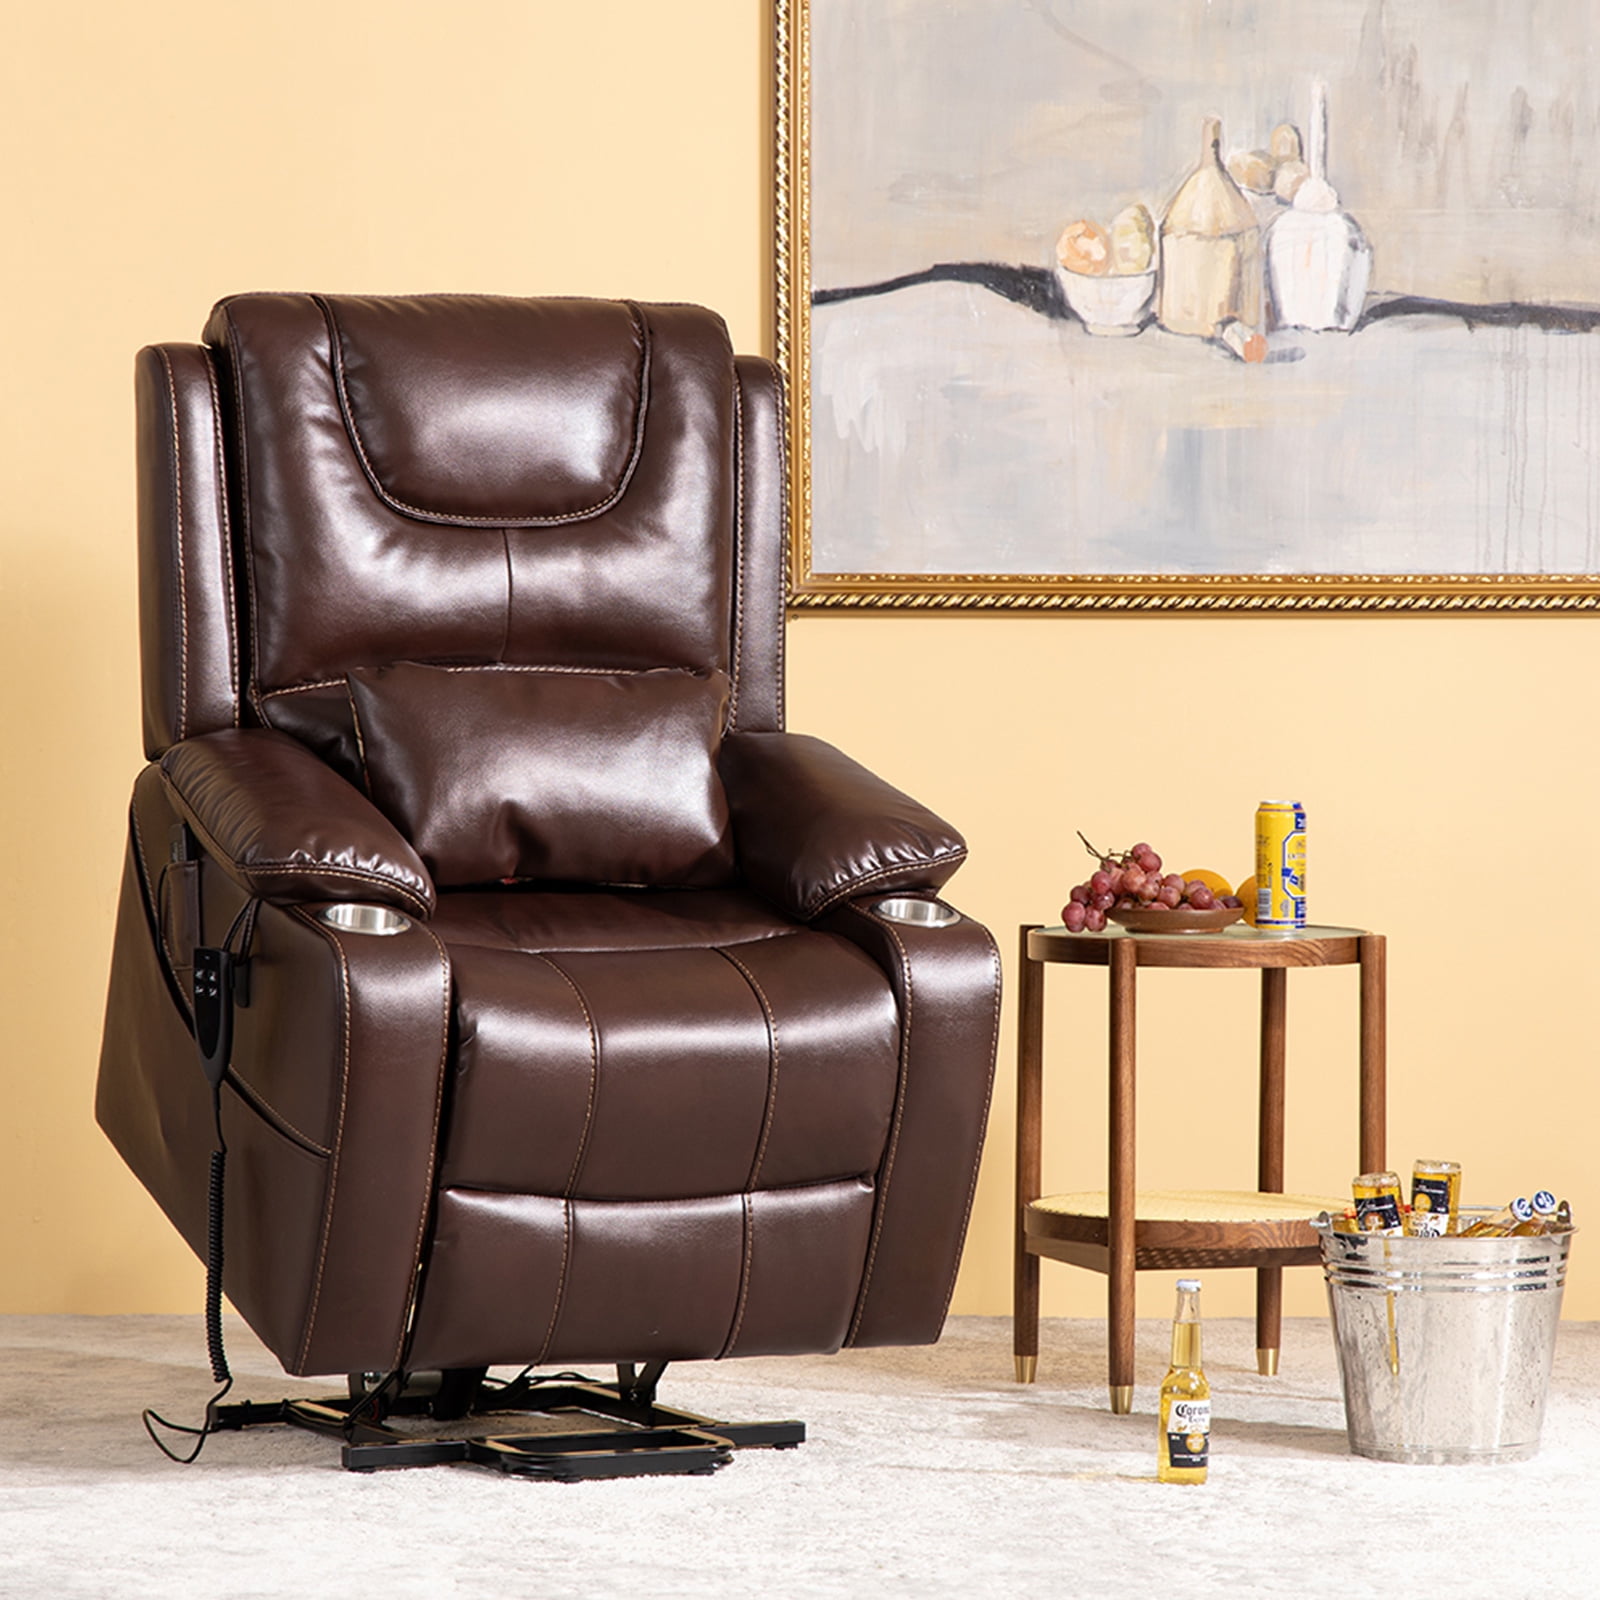 9181 Three Motor Recliner Chair with Lumbar Support(Lay Flat)